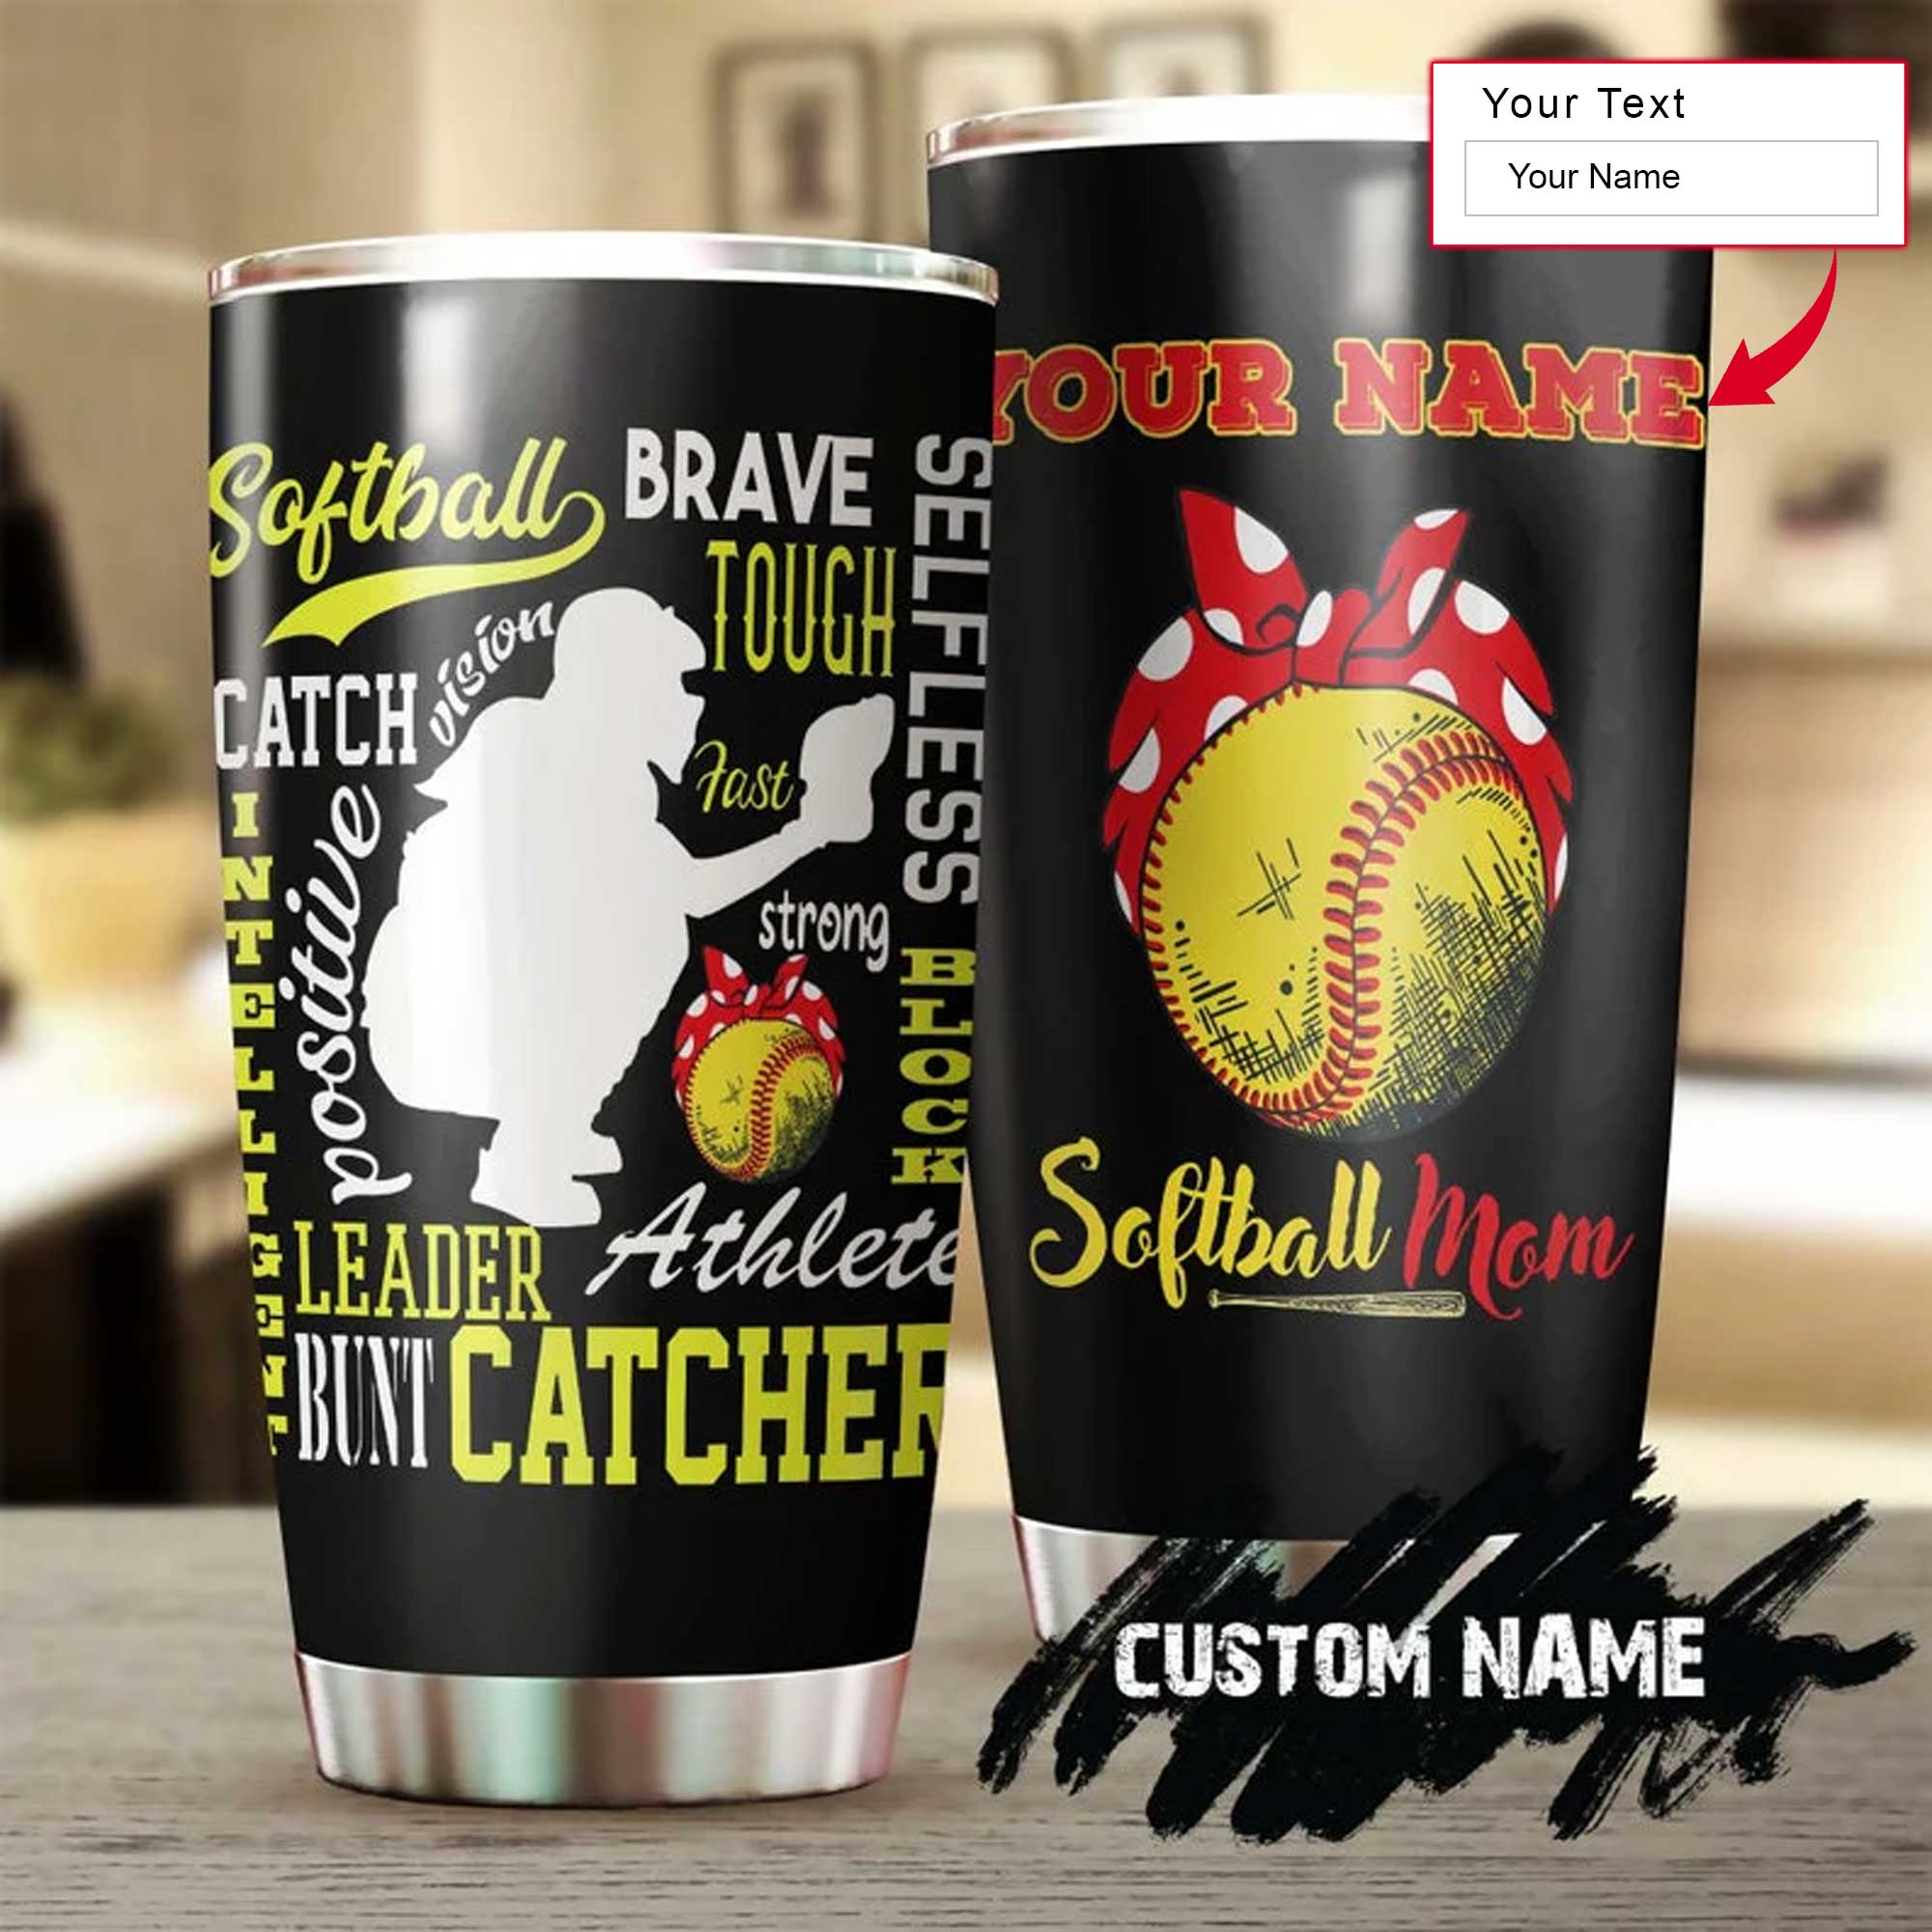 Personalized Mother's Day Gift Tumbler - Custom Gift For Mother's Day, Presents for Mom - Softball Mom Bunt Catcher Brave Tumbler